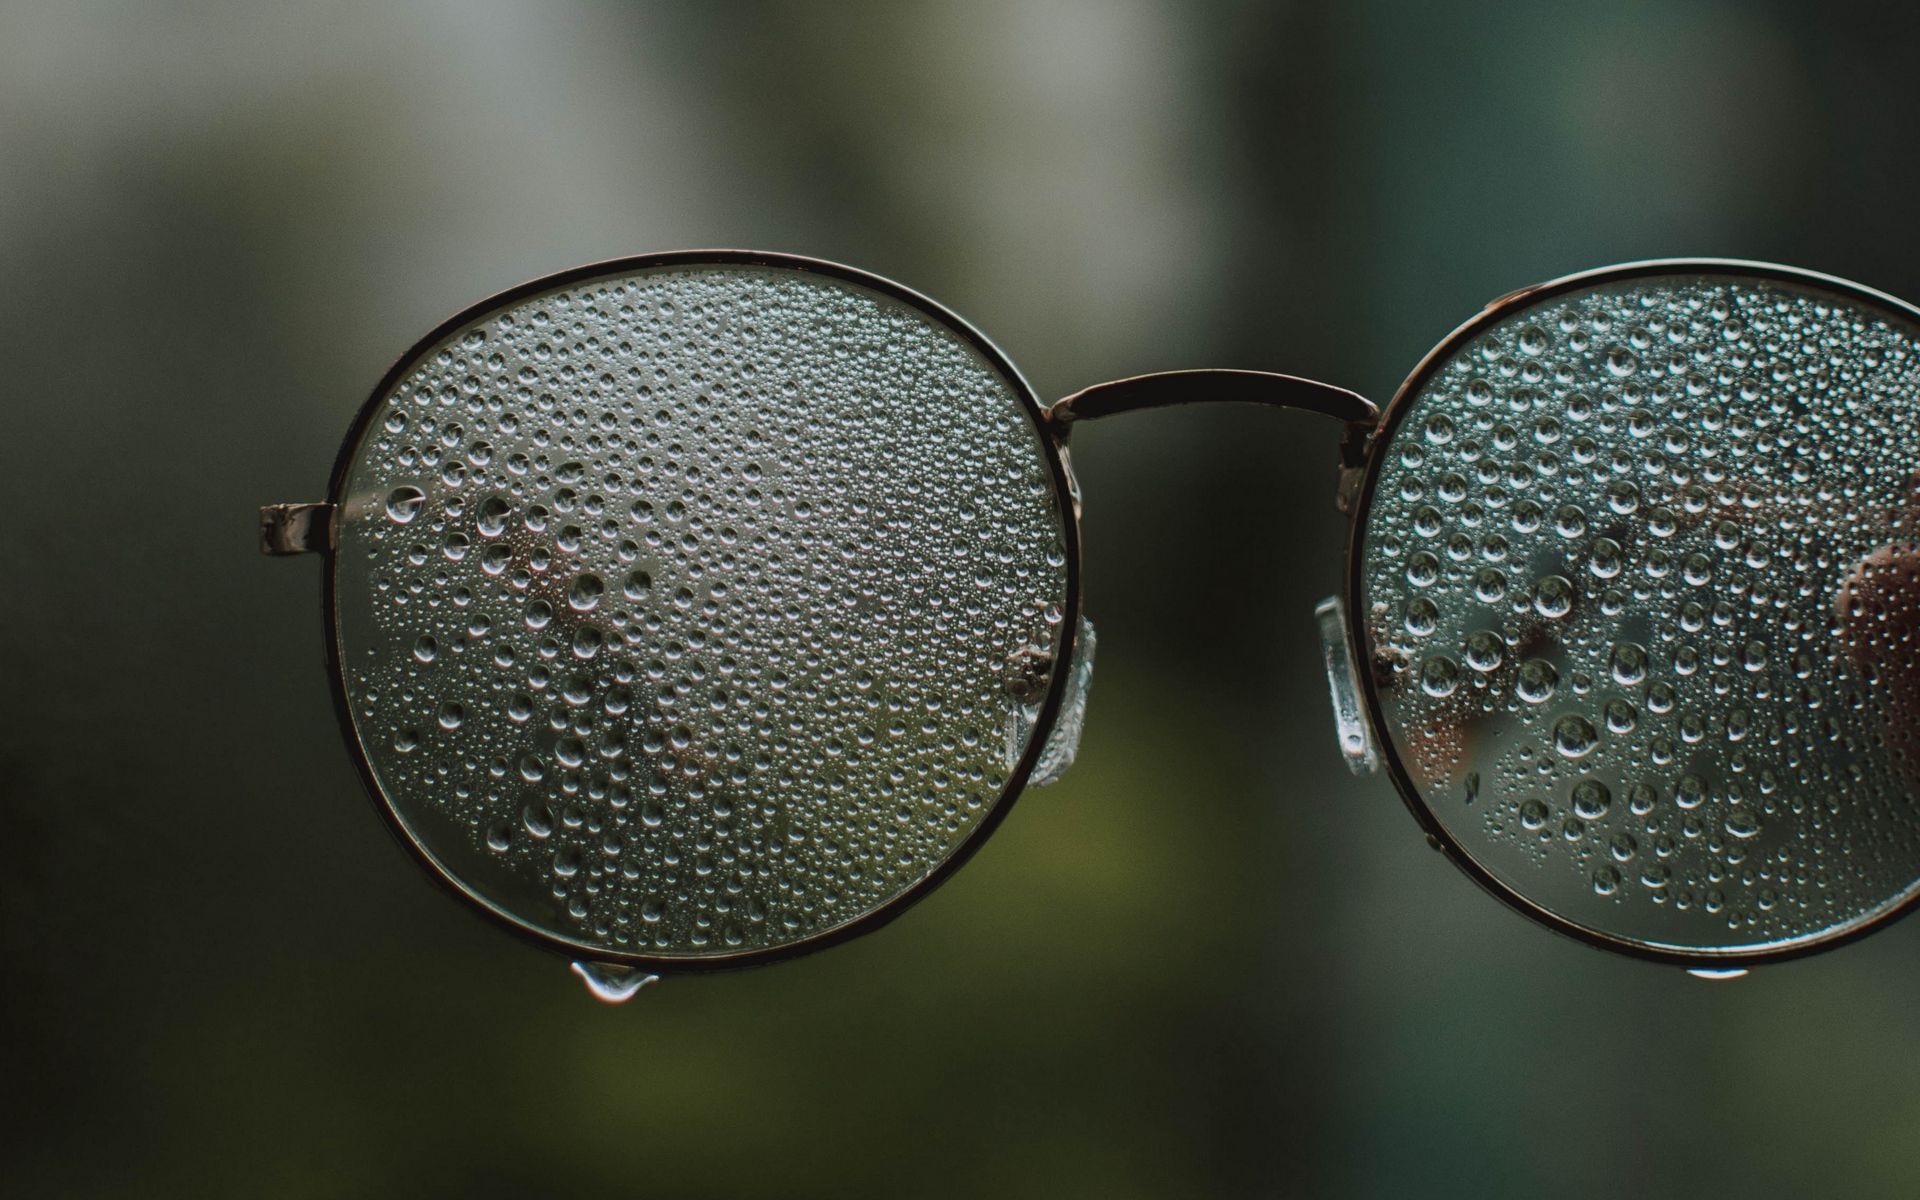 Glasses Hd Wallpapers